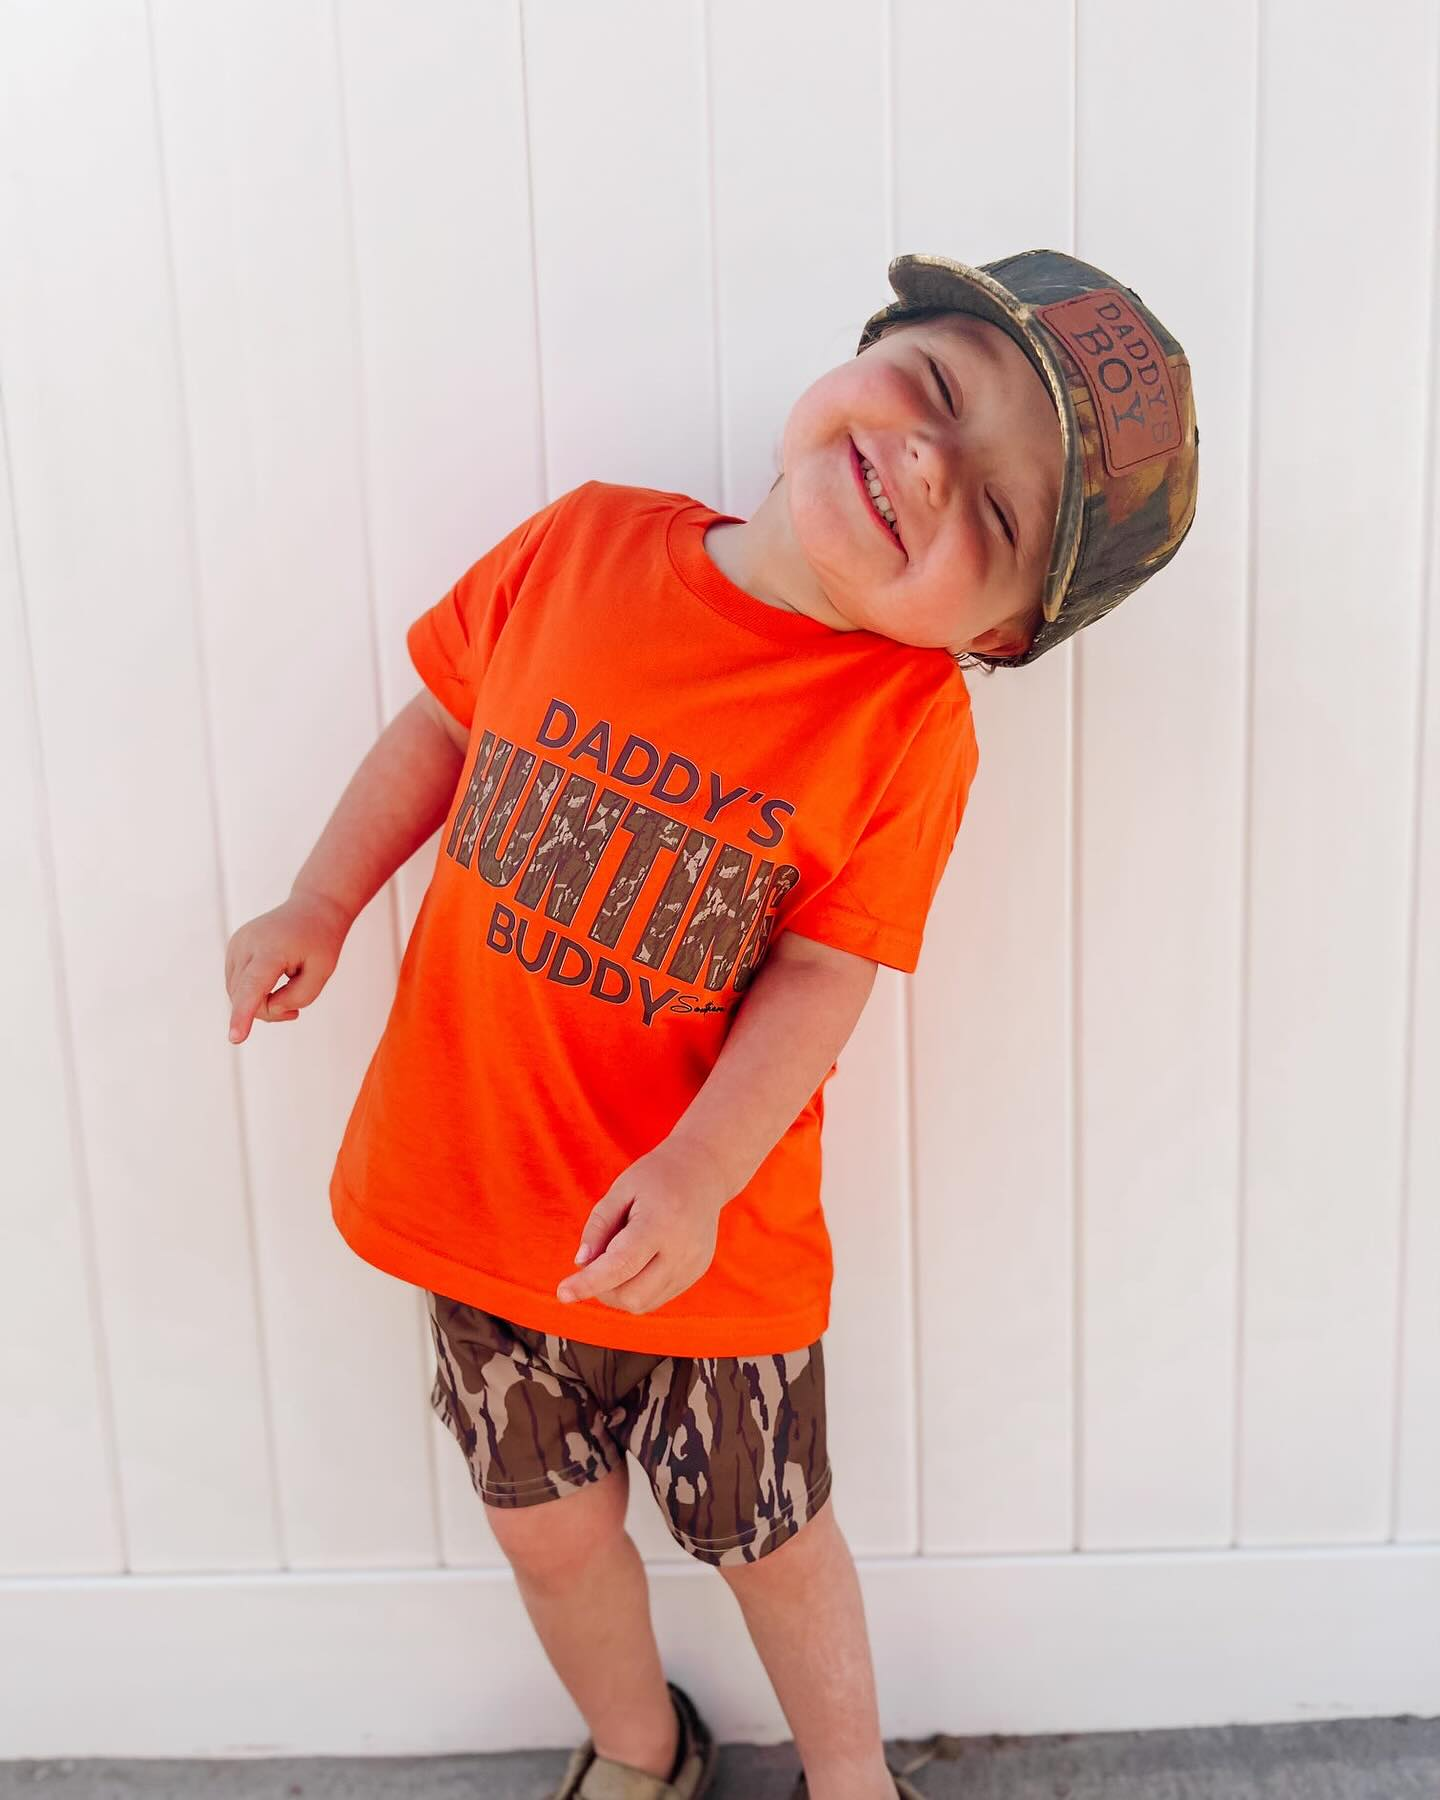 BSSO0922 daddy's hunting buddy orange short sleeve camouflage shorts suit  BT0672+SS0201